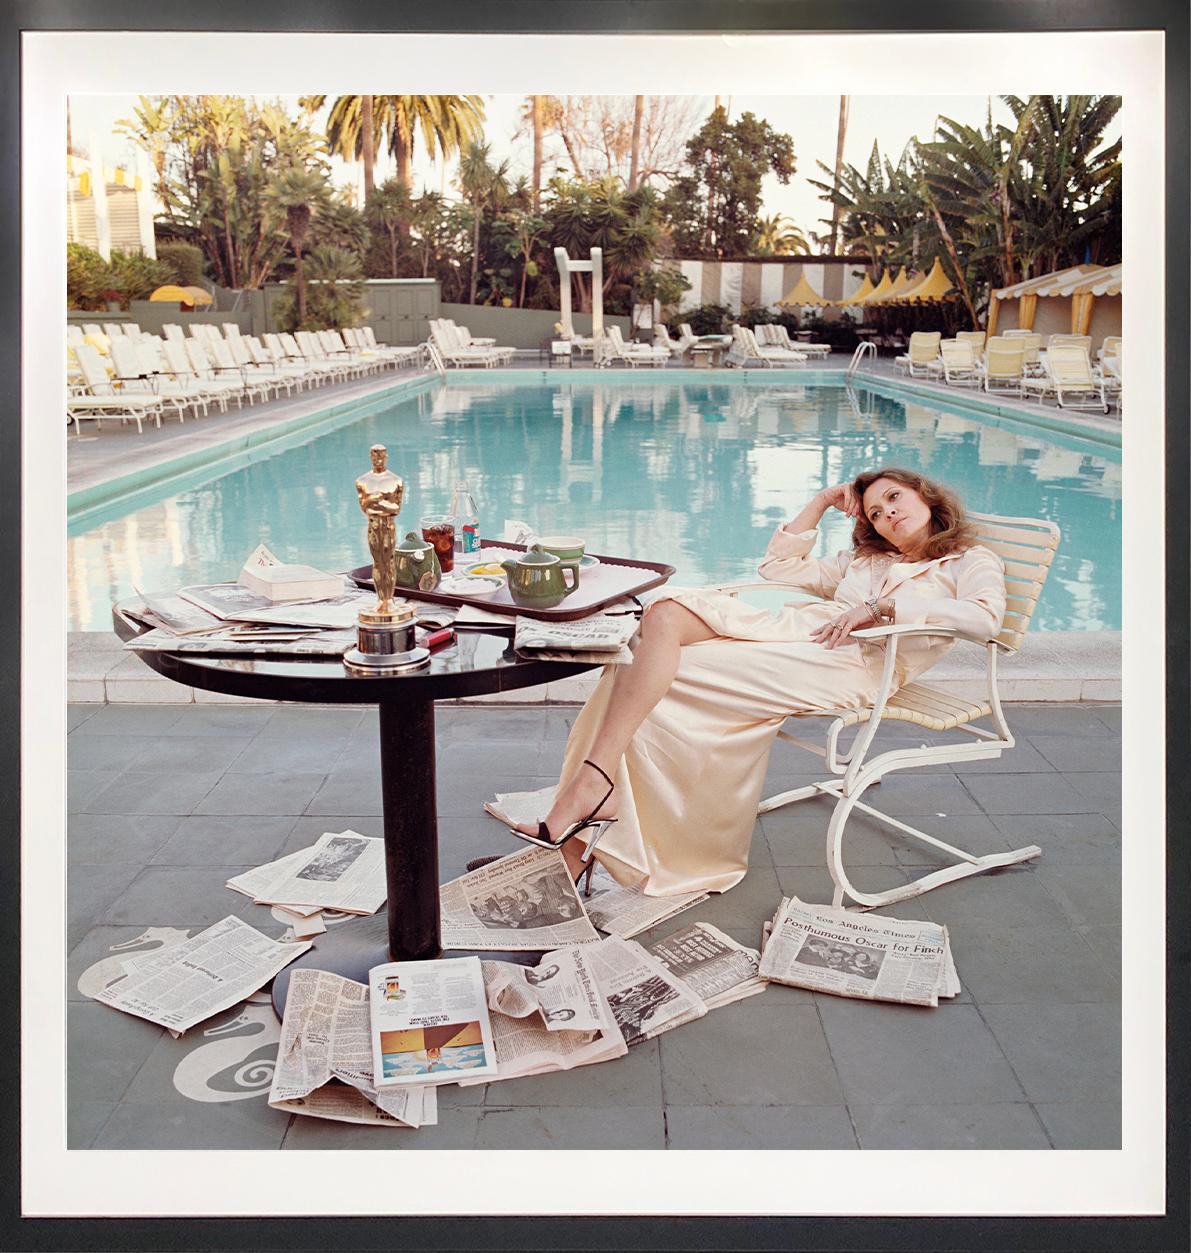 Edition 27 of 50
Digitally Printed Signature and Edition number on Front.
Posthumous Estate Print
A truly iconic image which would go down in history as Hollywood's most influential shot. Terry O'Neill - photographer / American actress Faye Dunaway